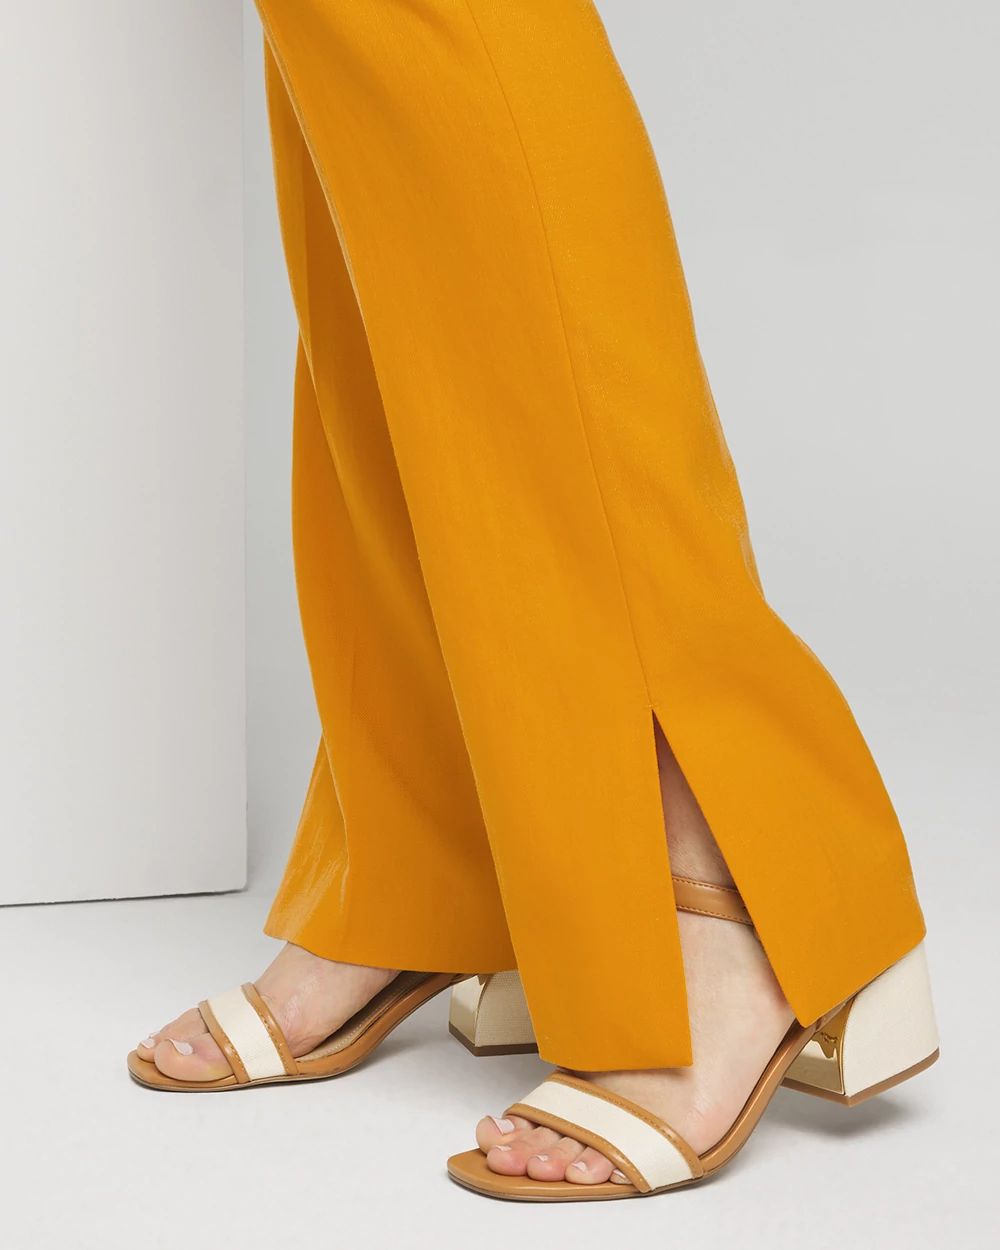 WHBM® Ines Slim Side-Slit Bootcut Pant click to view larger image.